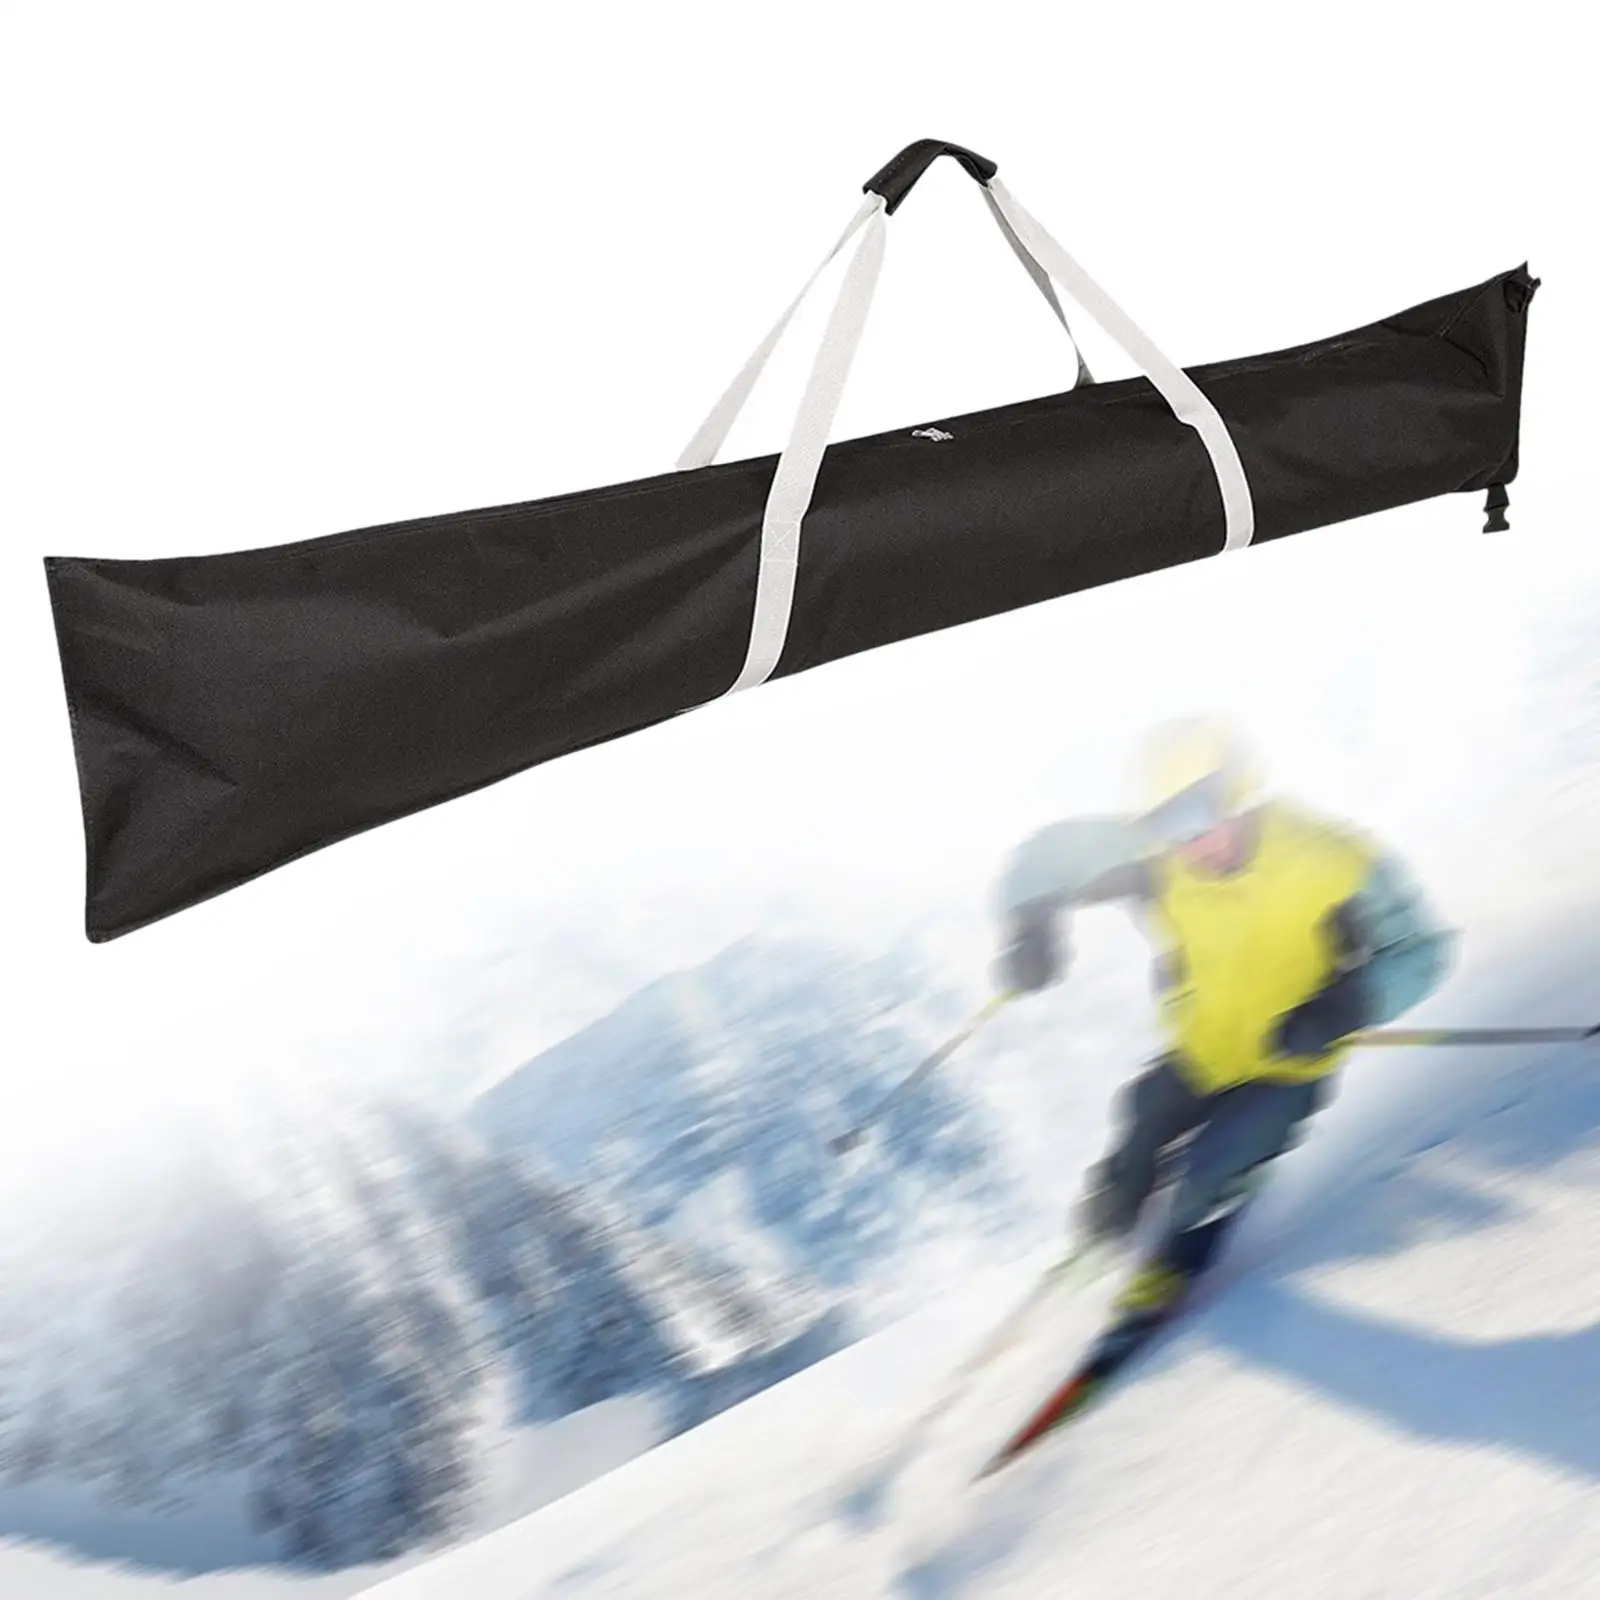 Ski Bag Durable with Handle Transport Portable Snowboards Poles Bag Ski Snowboard Travel Bag for Skiing Outdoor Winter Sports